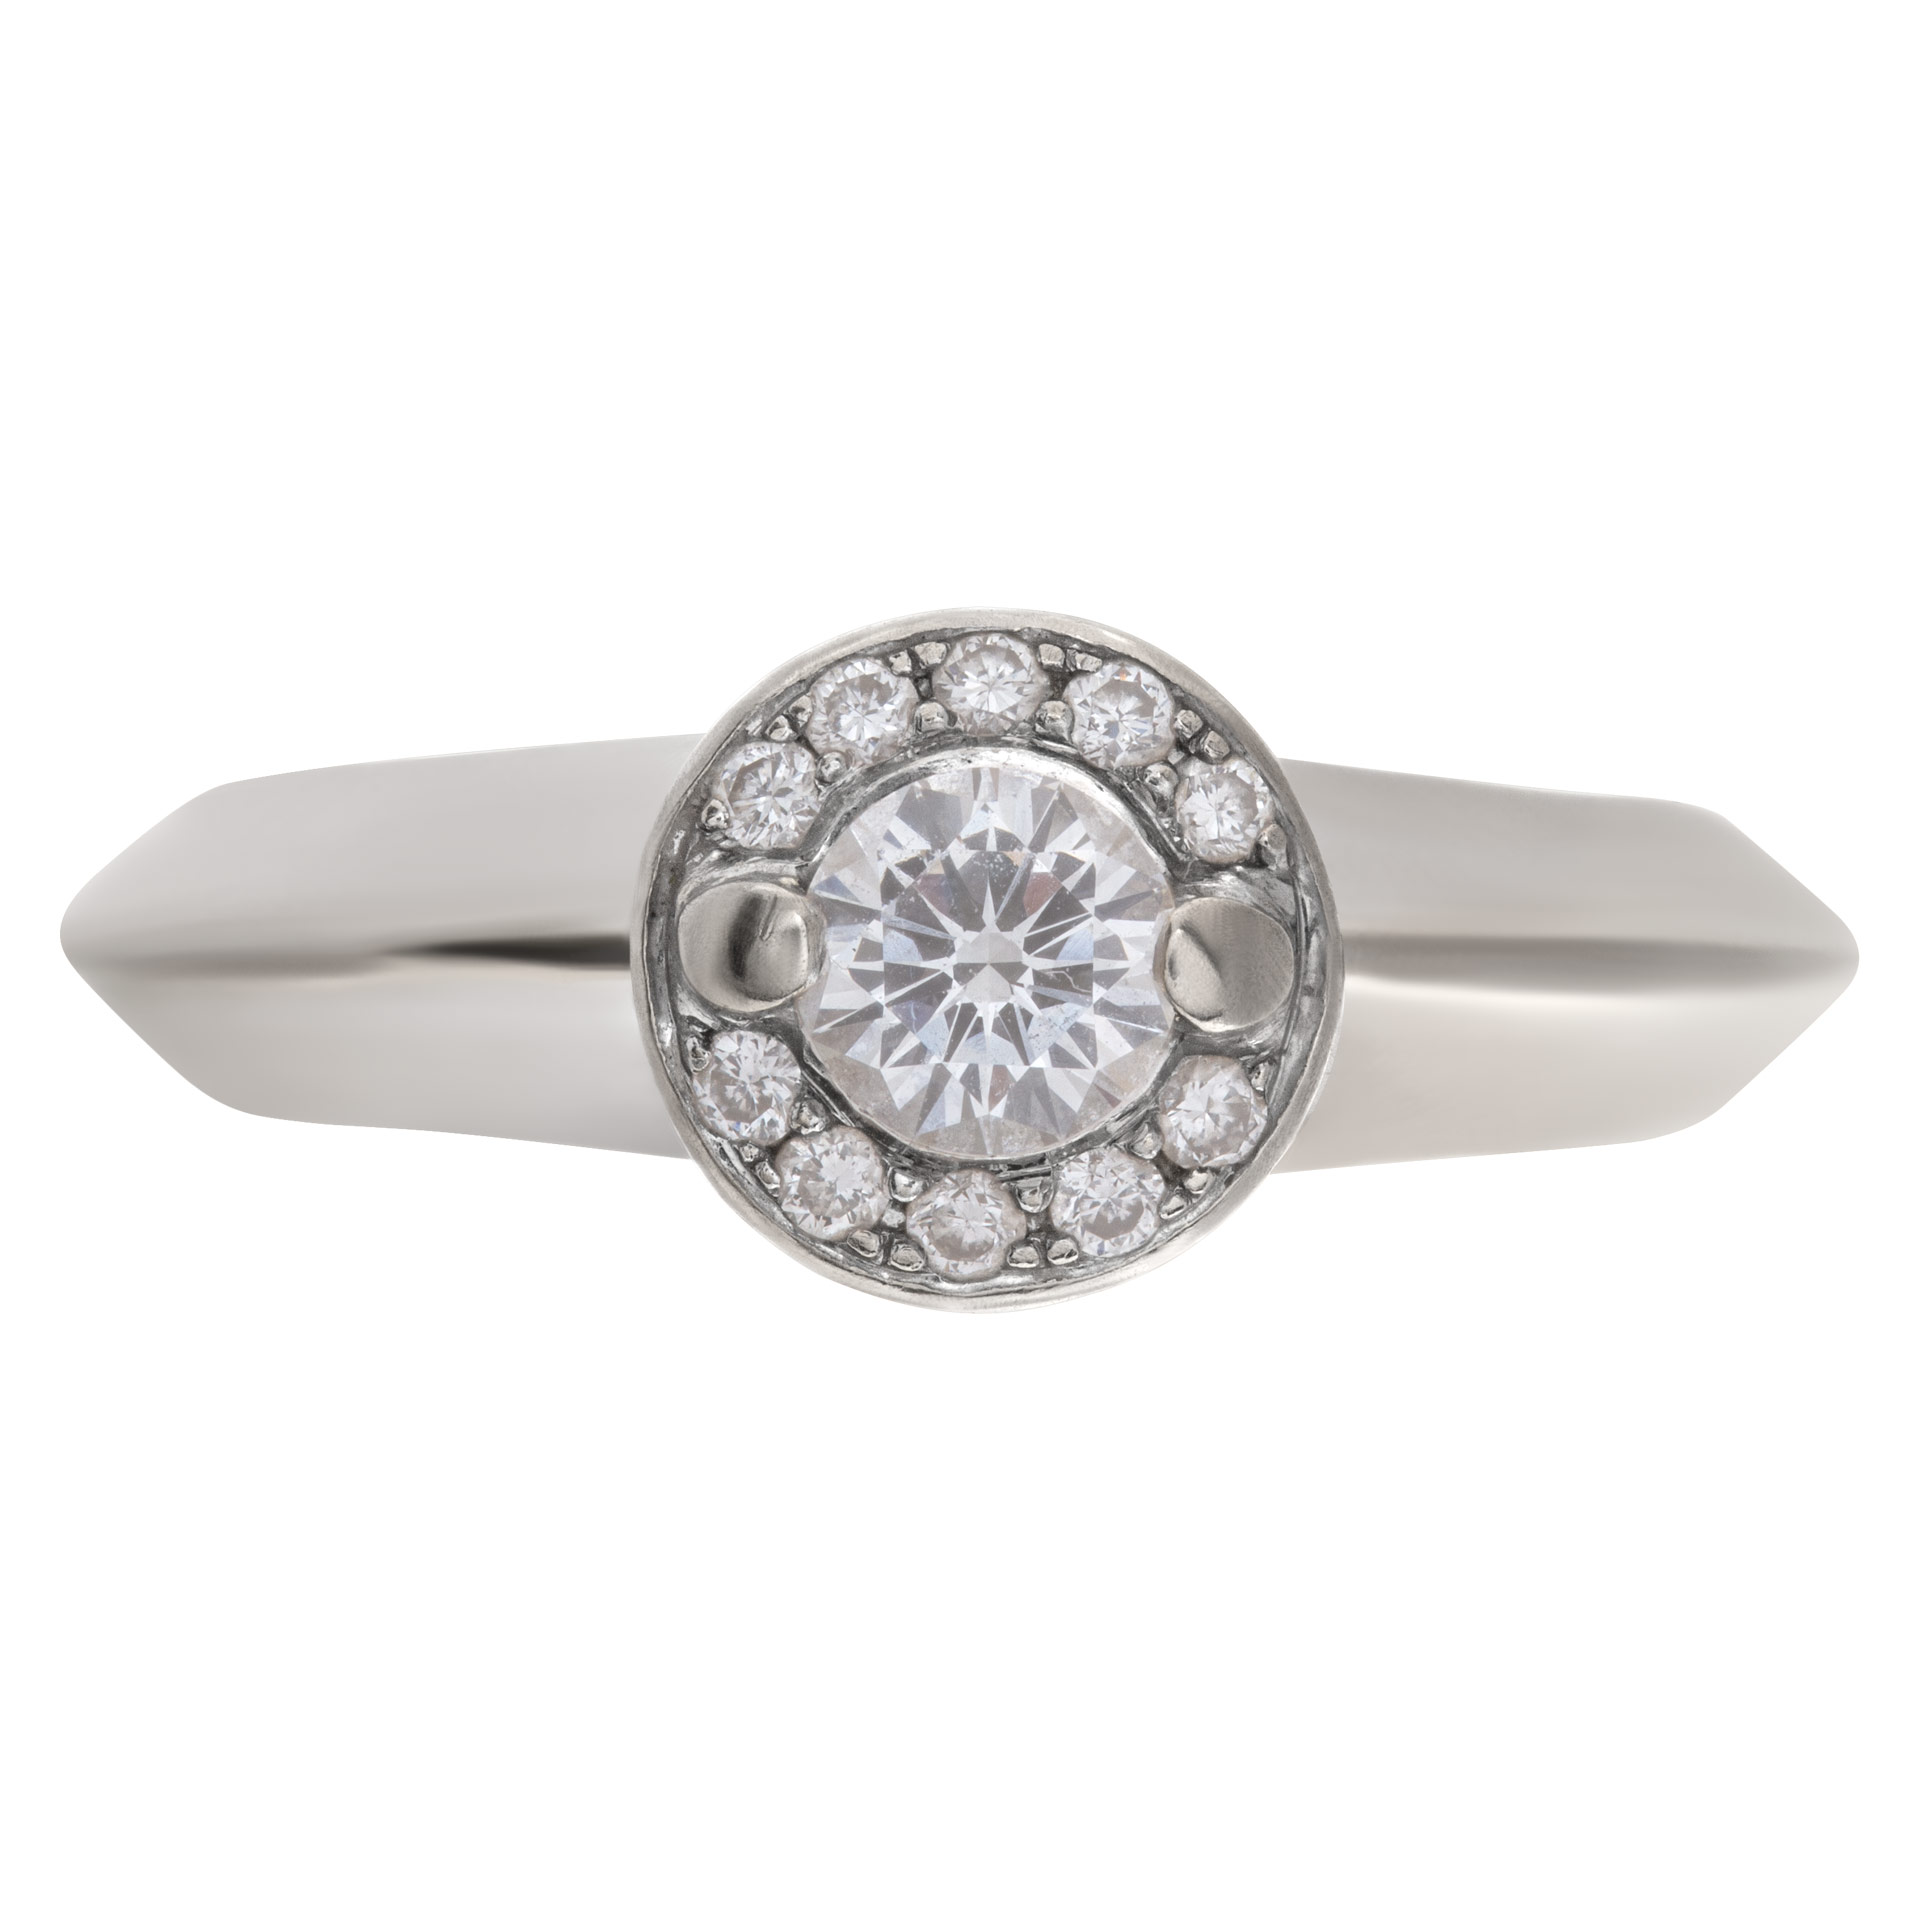 Diamond ring in 18k white gold with approximately 0.43 carats image 1